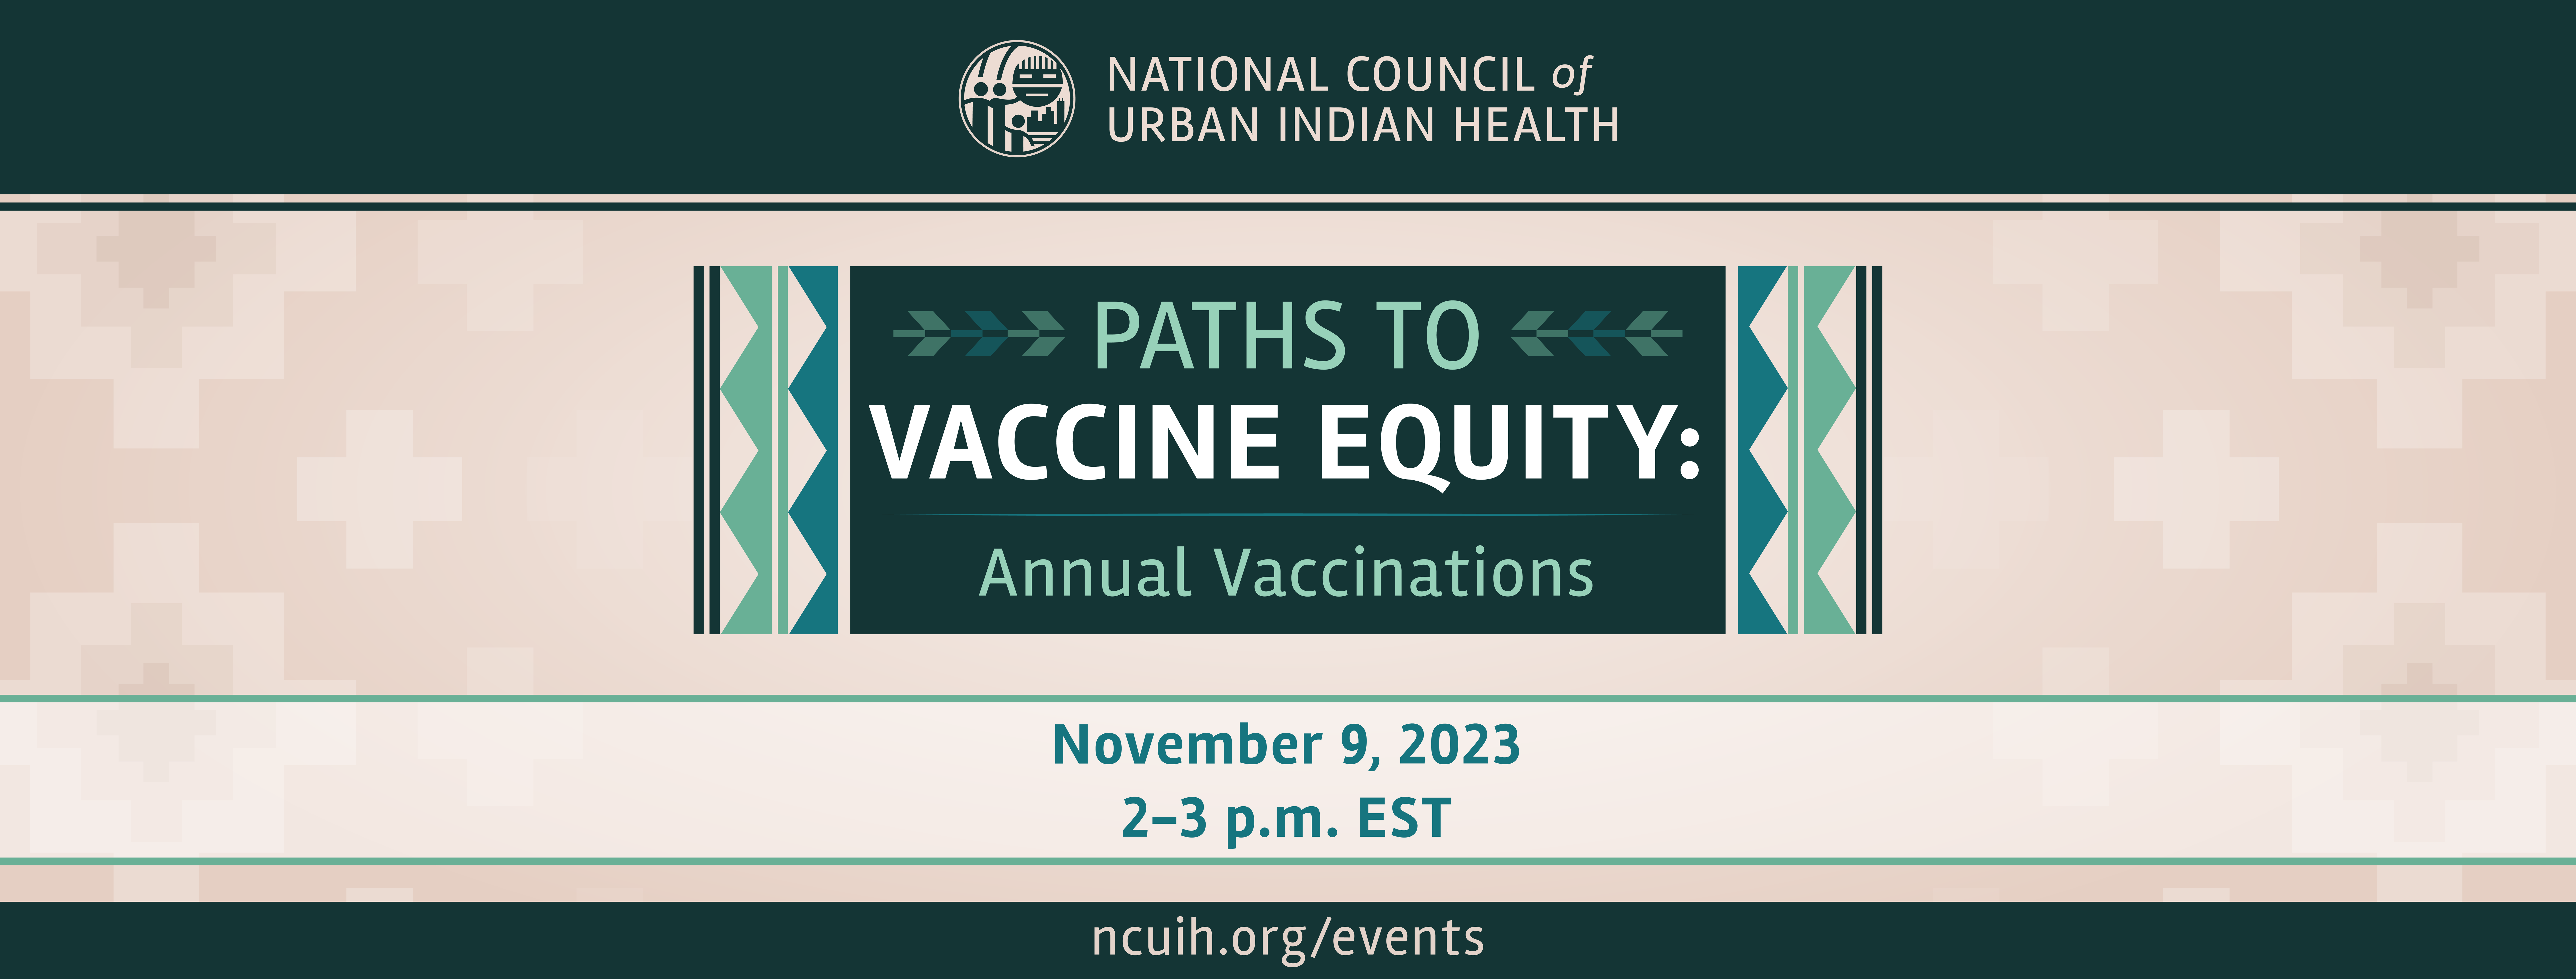 Paths to Vaccine Equity: Annual Vaccinations